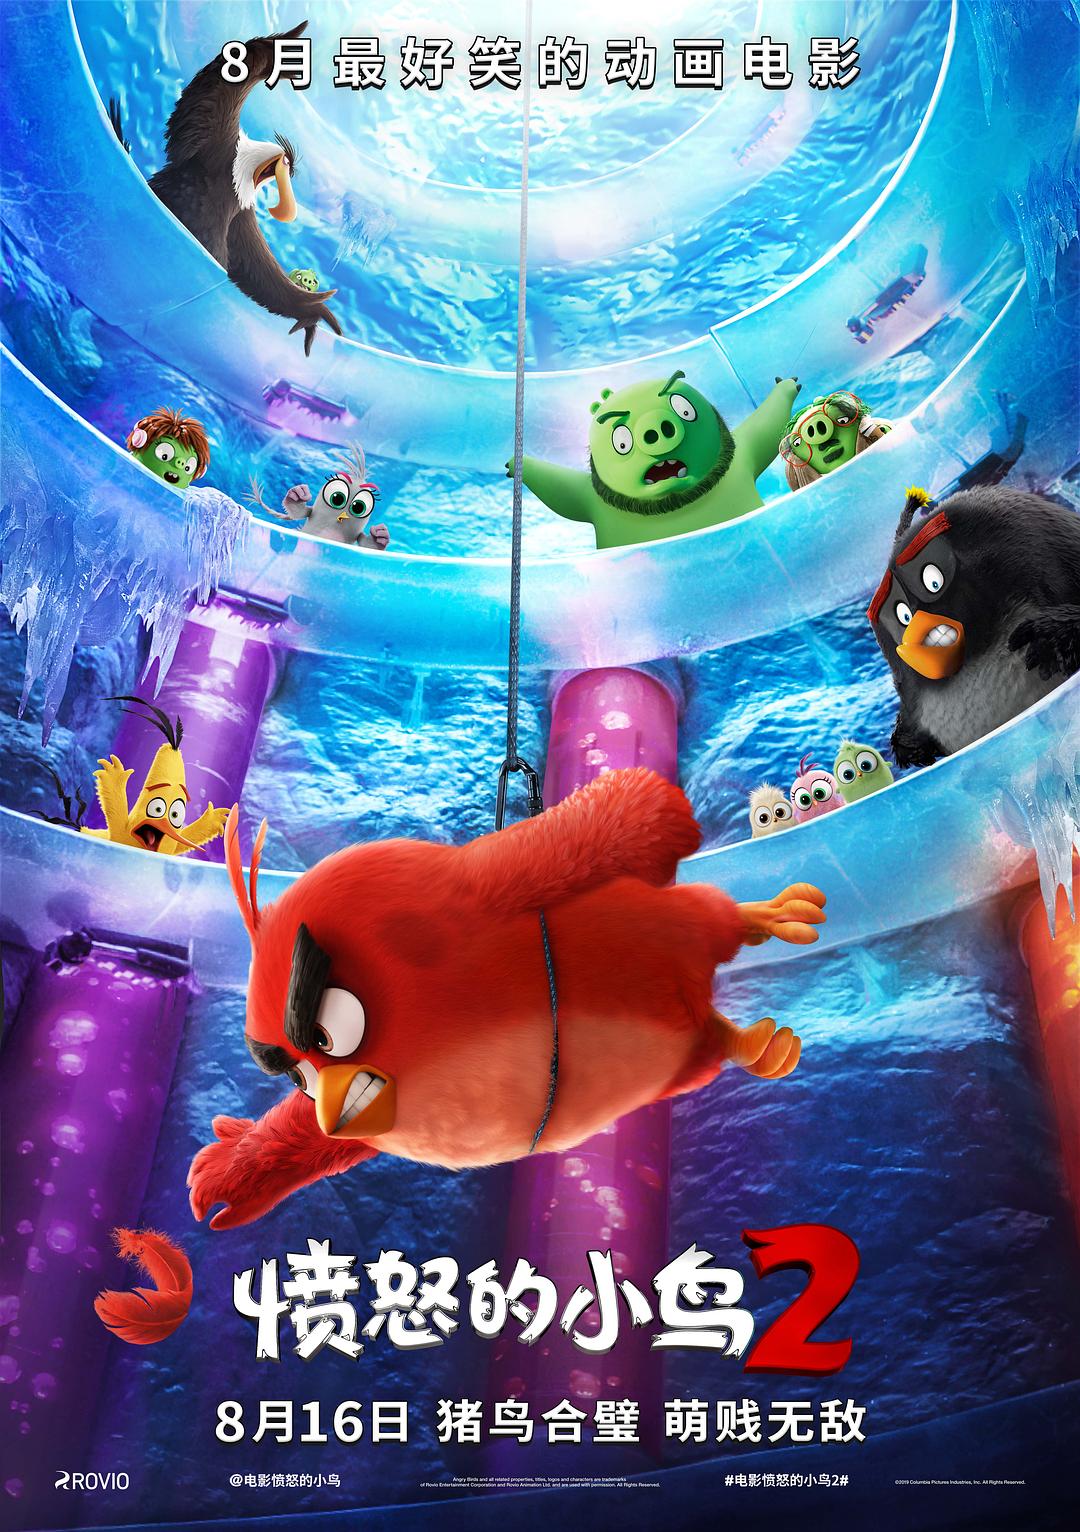 ŭС2 The.Angry.Birds.Movie.2.2019.1080p.BluRay.x264.DTS-HD.MA.5.1-FGT 6.01GB-1.png